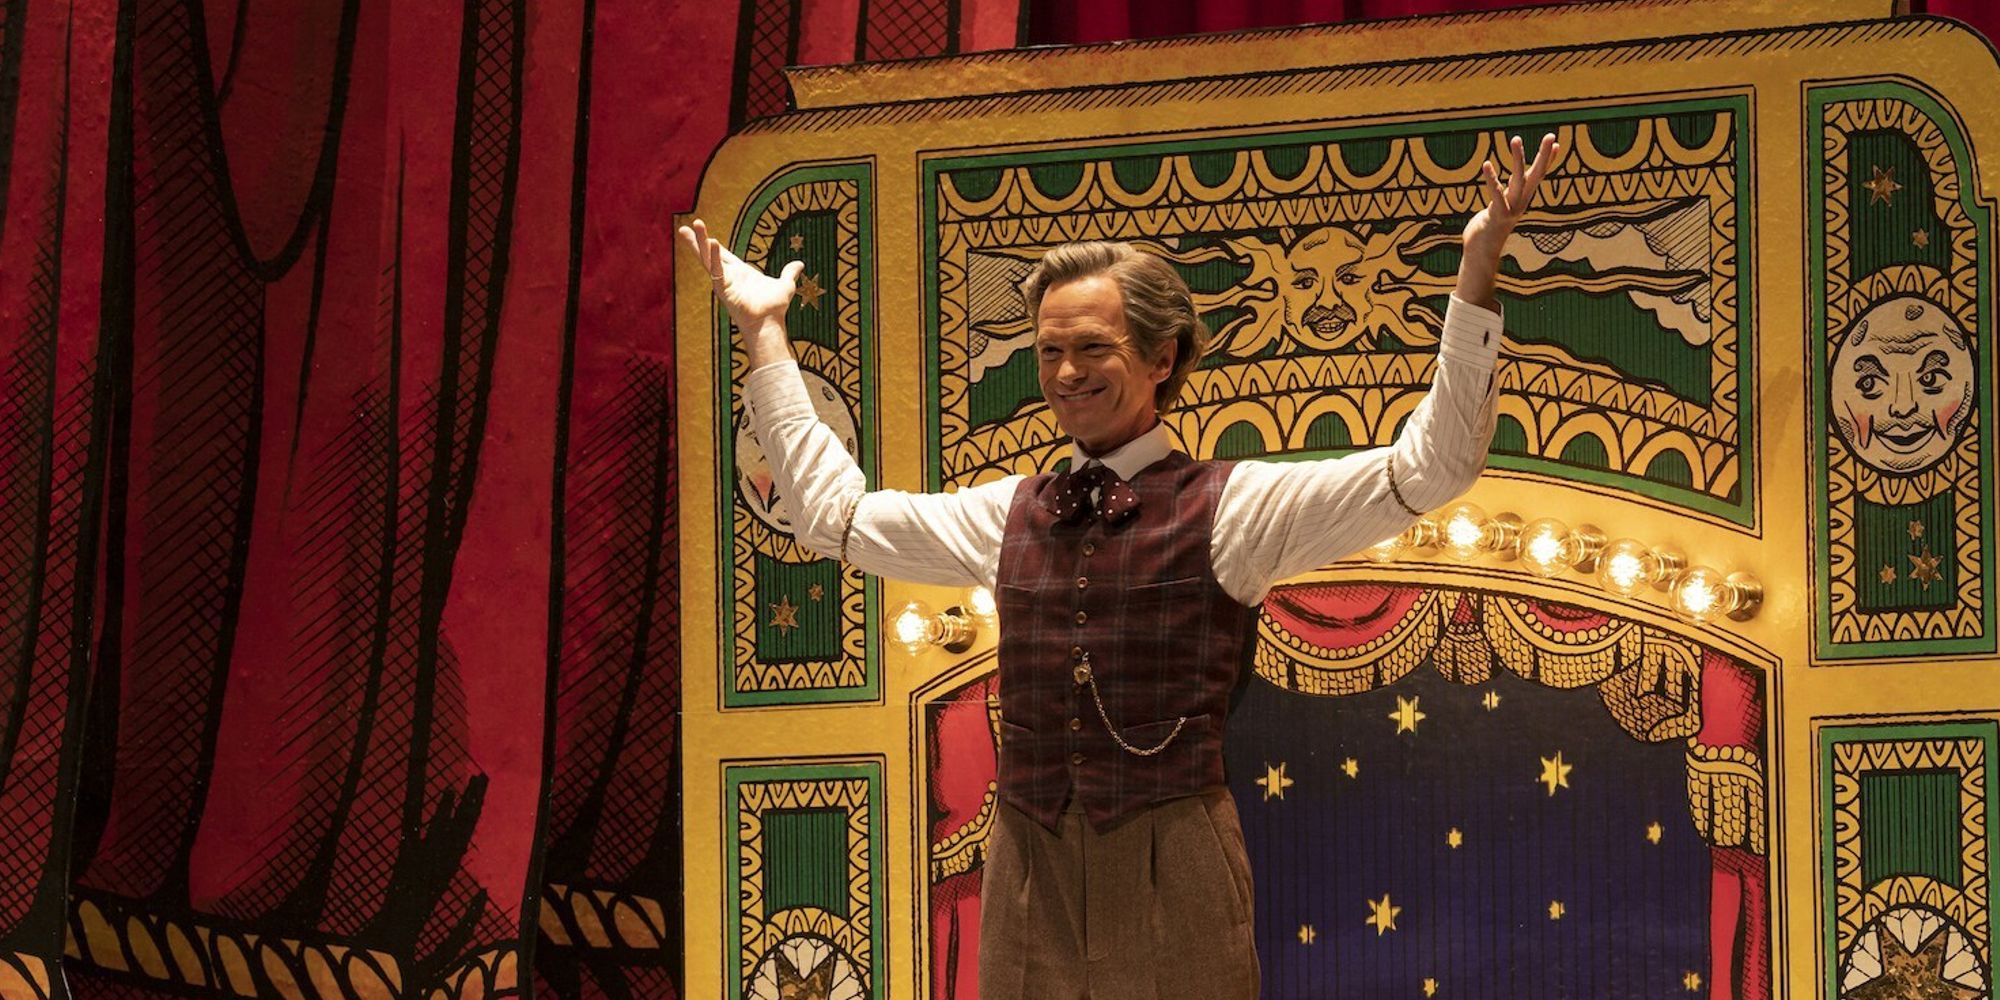 Neil Patrick Harris as The Toymaker on stage in Doctor Who.